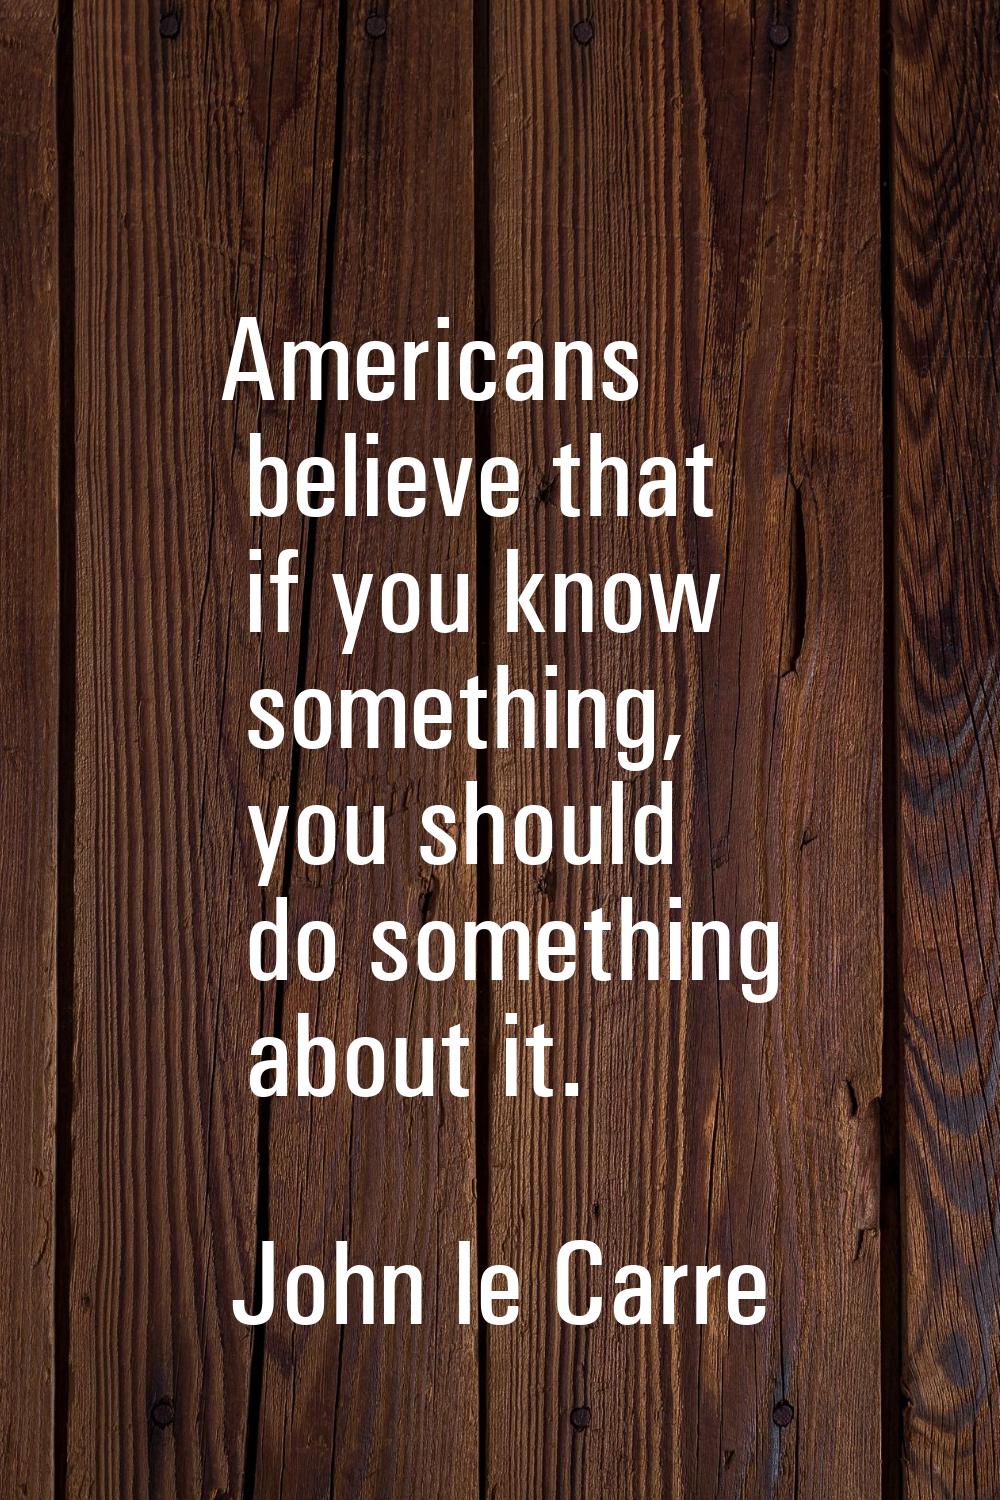 Americans believe that if you know something, you should do something about it.